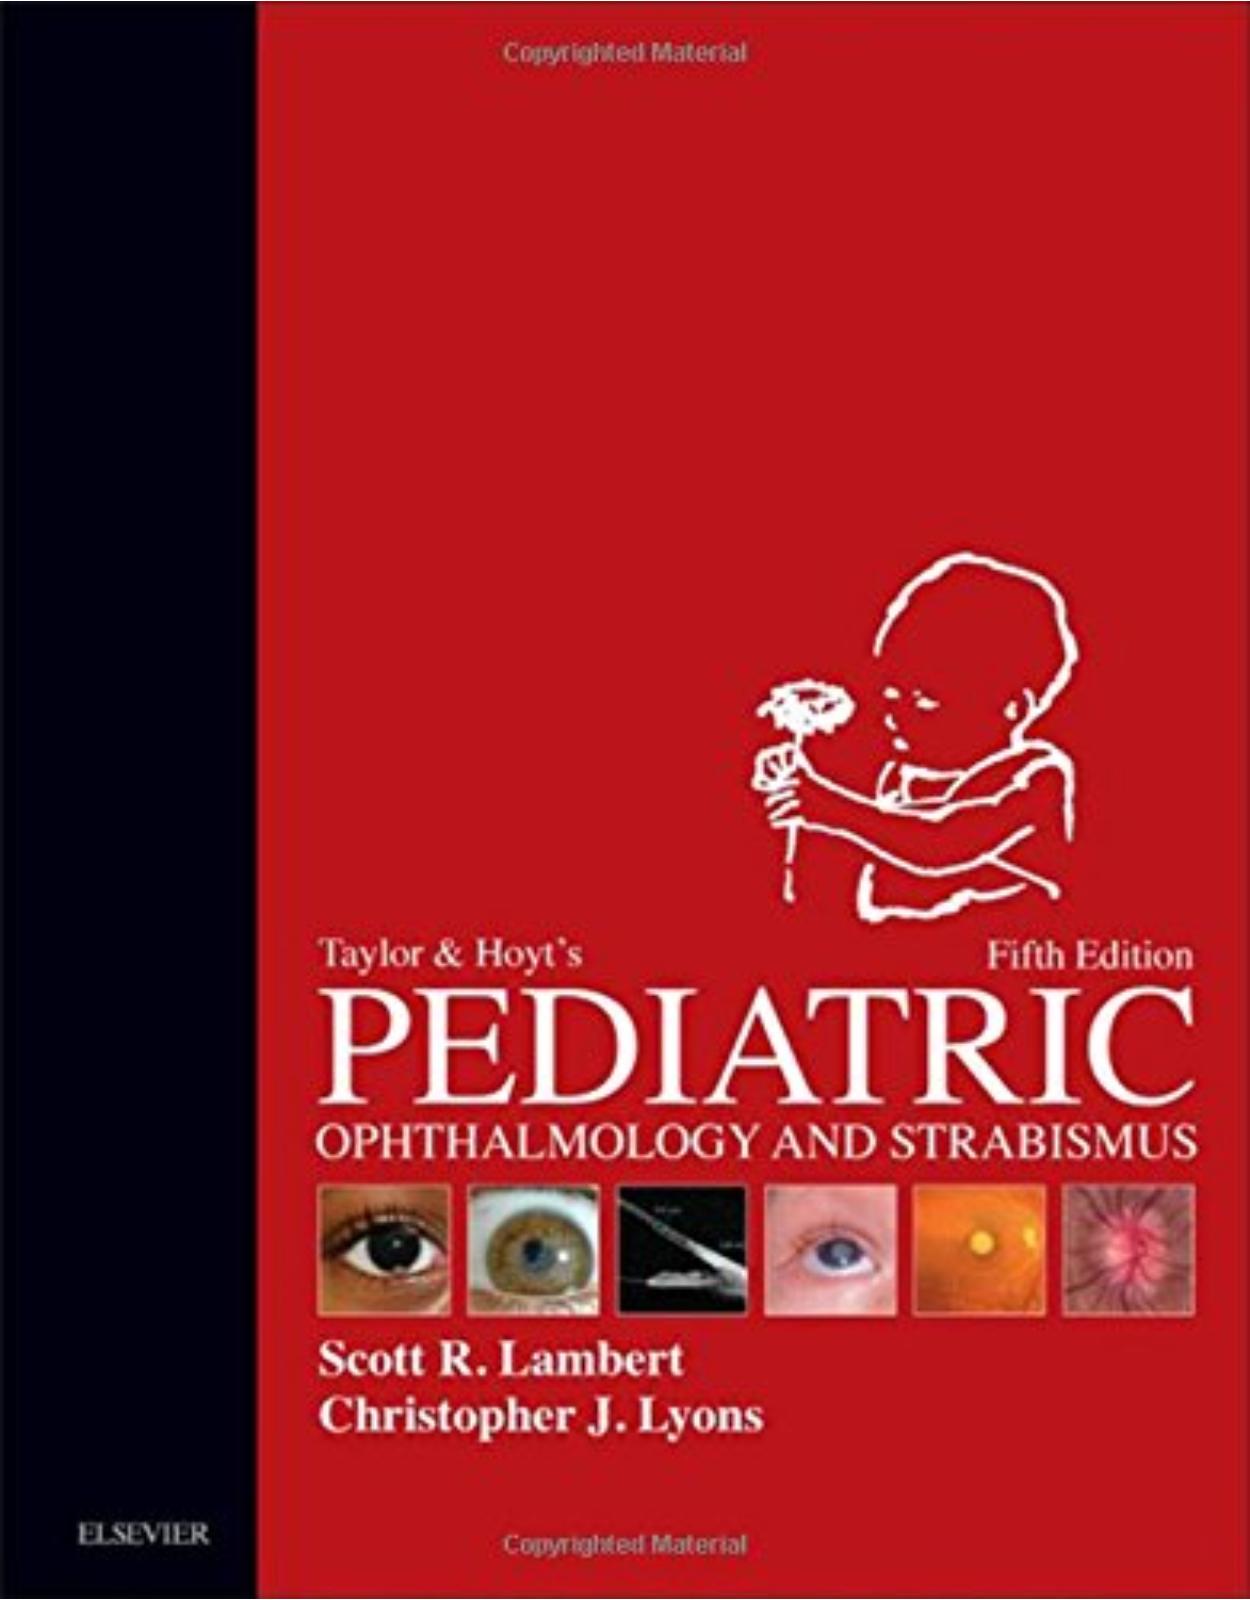 Taylor and Hoyt’s Pediatric Ophthalmology and Strabismus, 5th Edition 